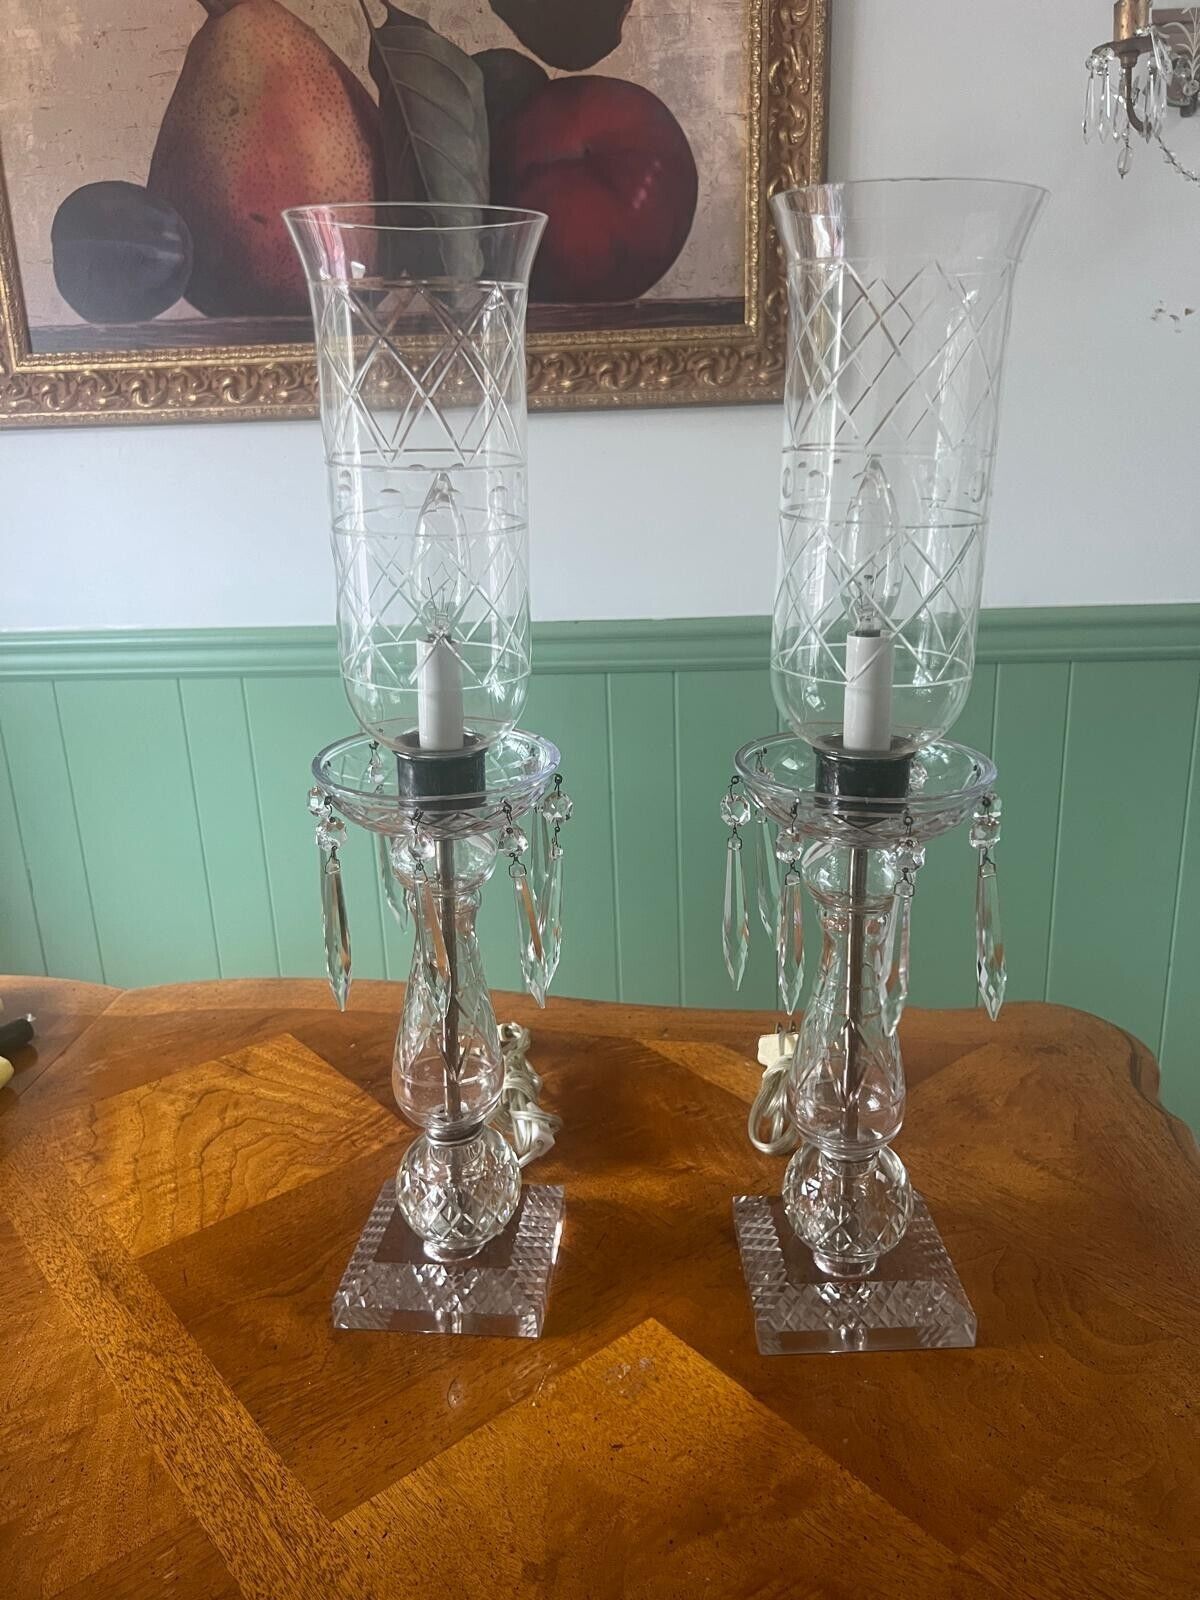 Pair of Large Cut Etched Crystal Hurricane Lustre Mantle Lamps Drop Prisms